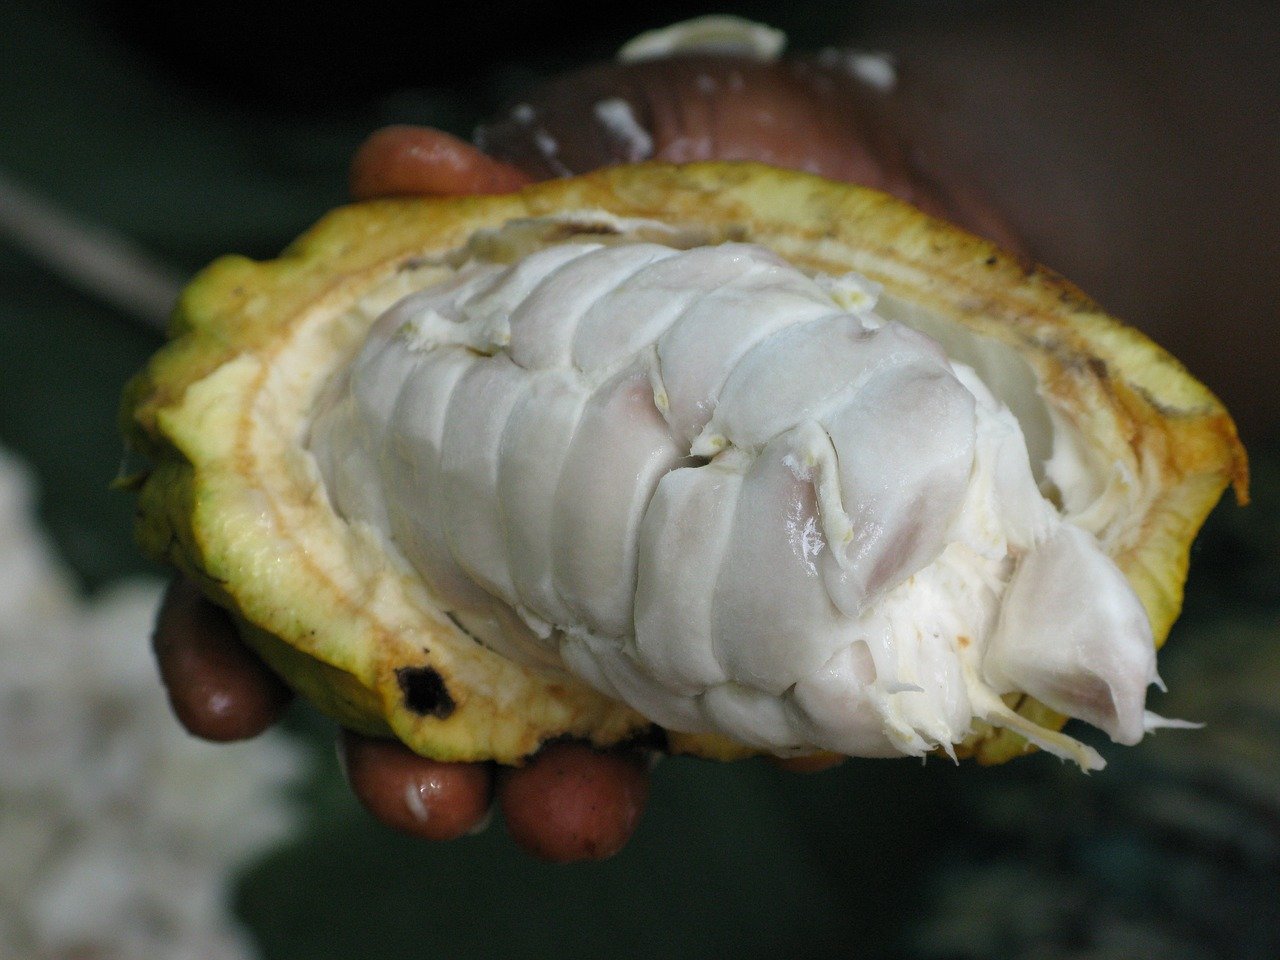 A half-opened cacao pod showing the white, fleshy fruit inside